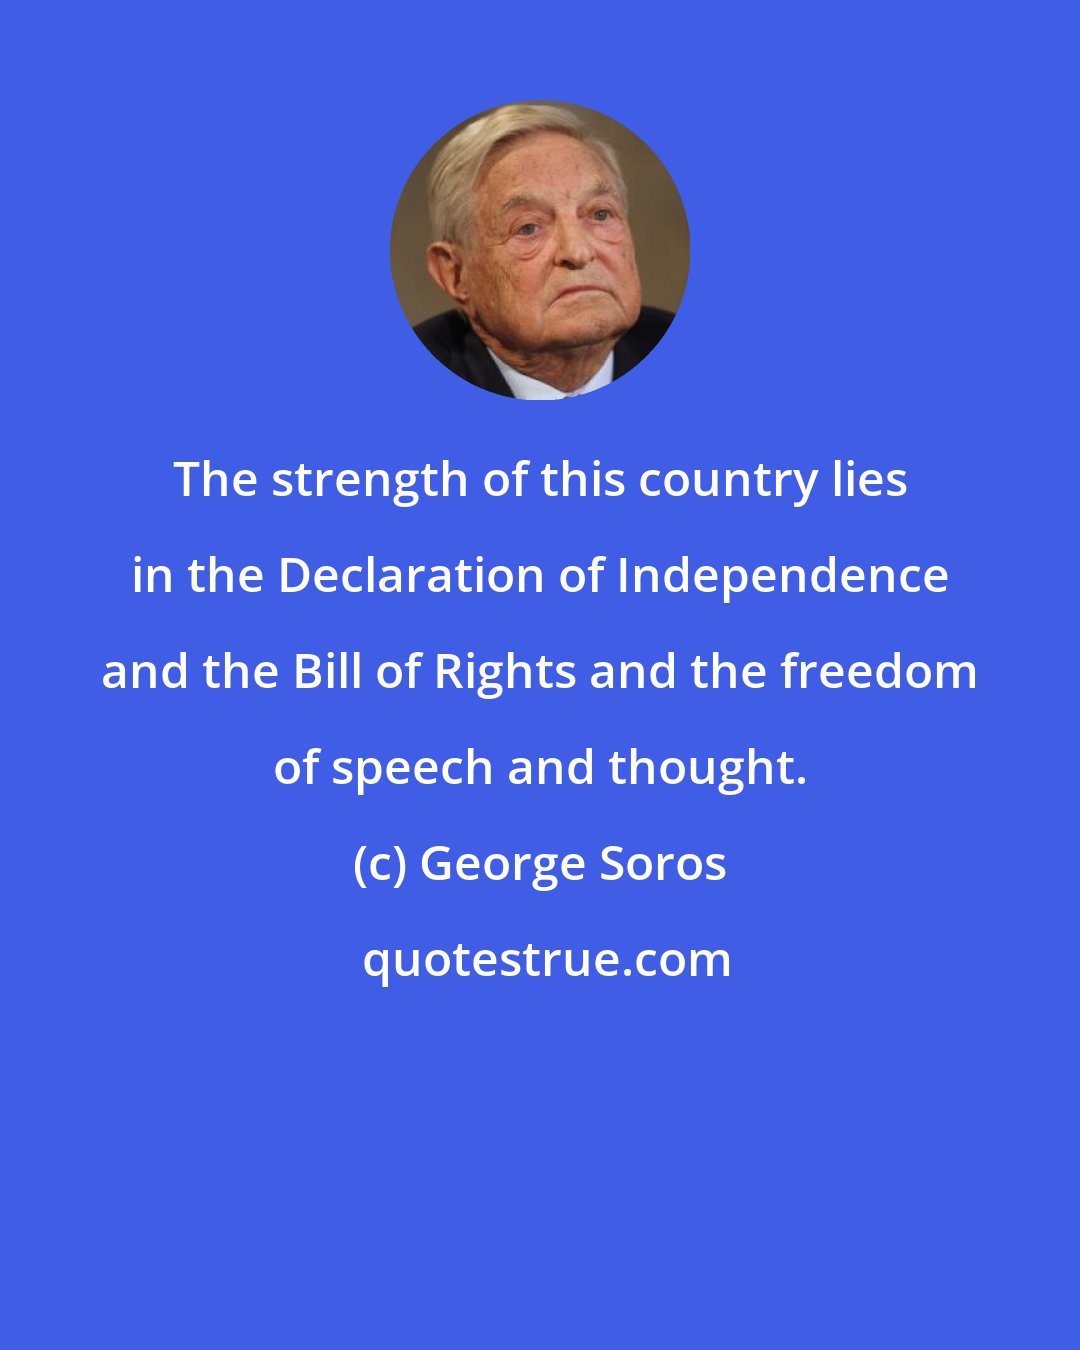 George Soros: The strength of this country lies in the Declaration of Independence and the Bill of Rights and the freedom of speech and thought.